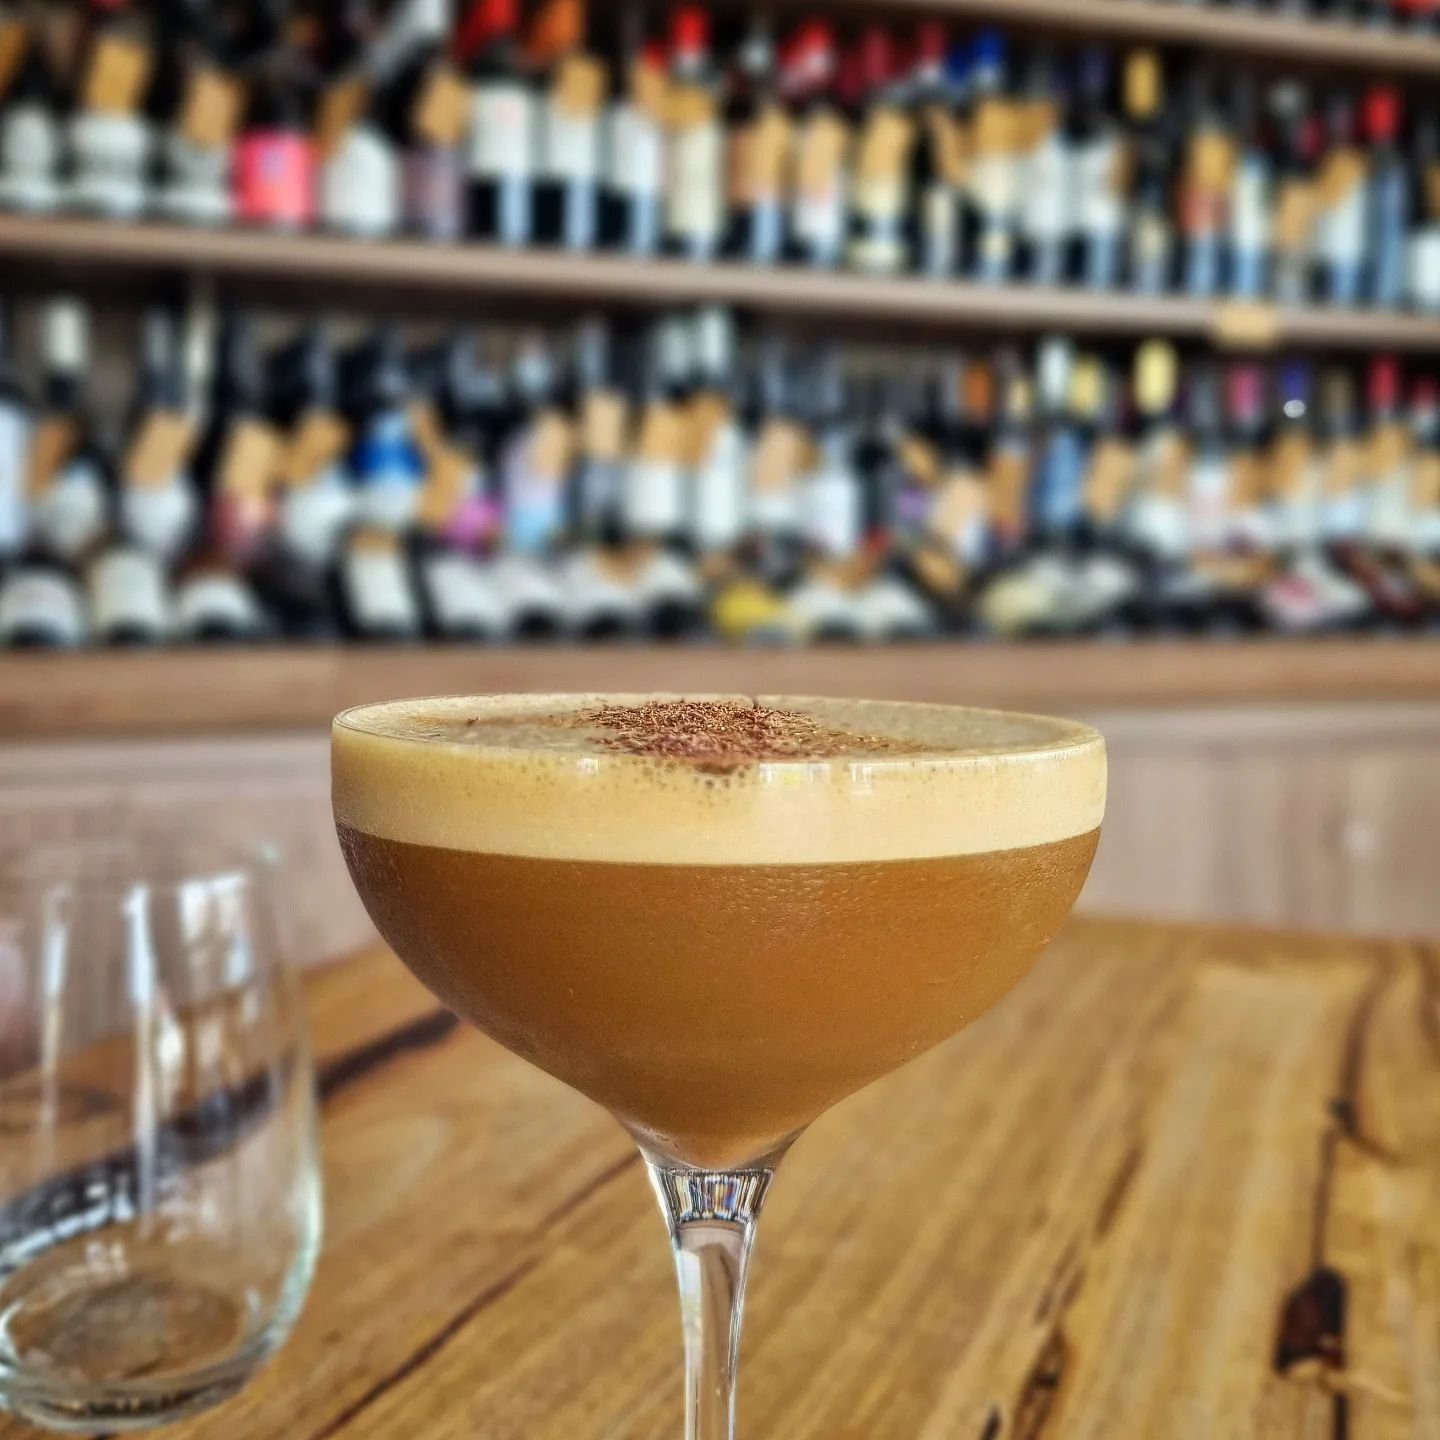 When you're unsure which bottle to choose from the library, that is our wine wall...

... Start with a Maple Espresso Martini 👌🏼

#humpday #timetorelax